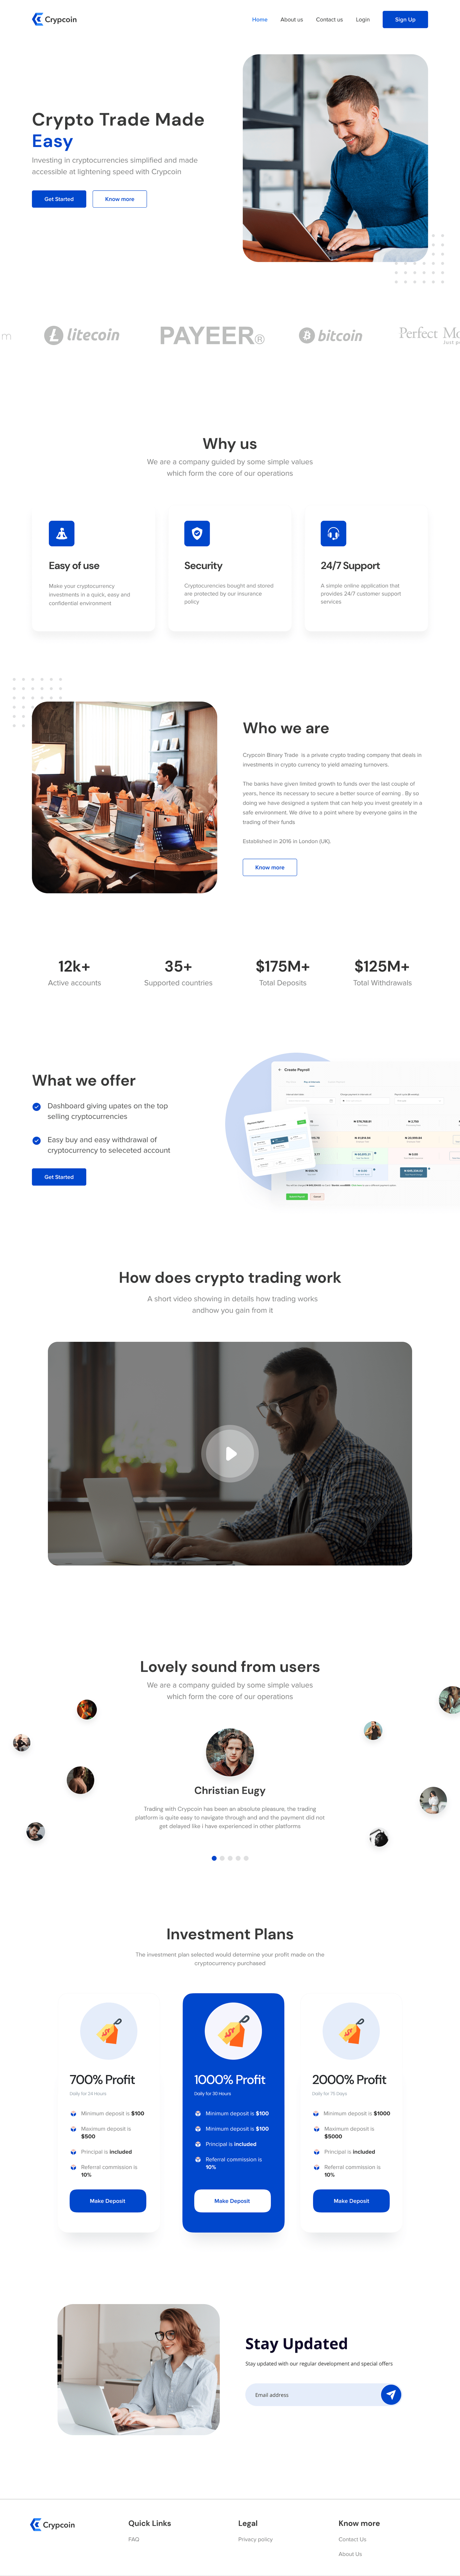 design home screen landing page UI Website cryptocurrency trading bitcoin